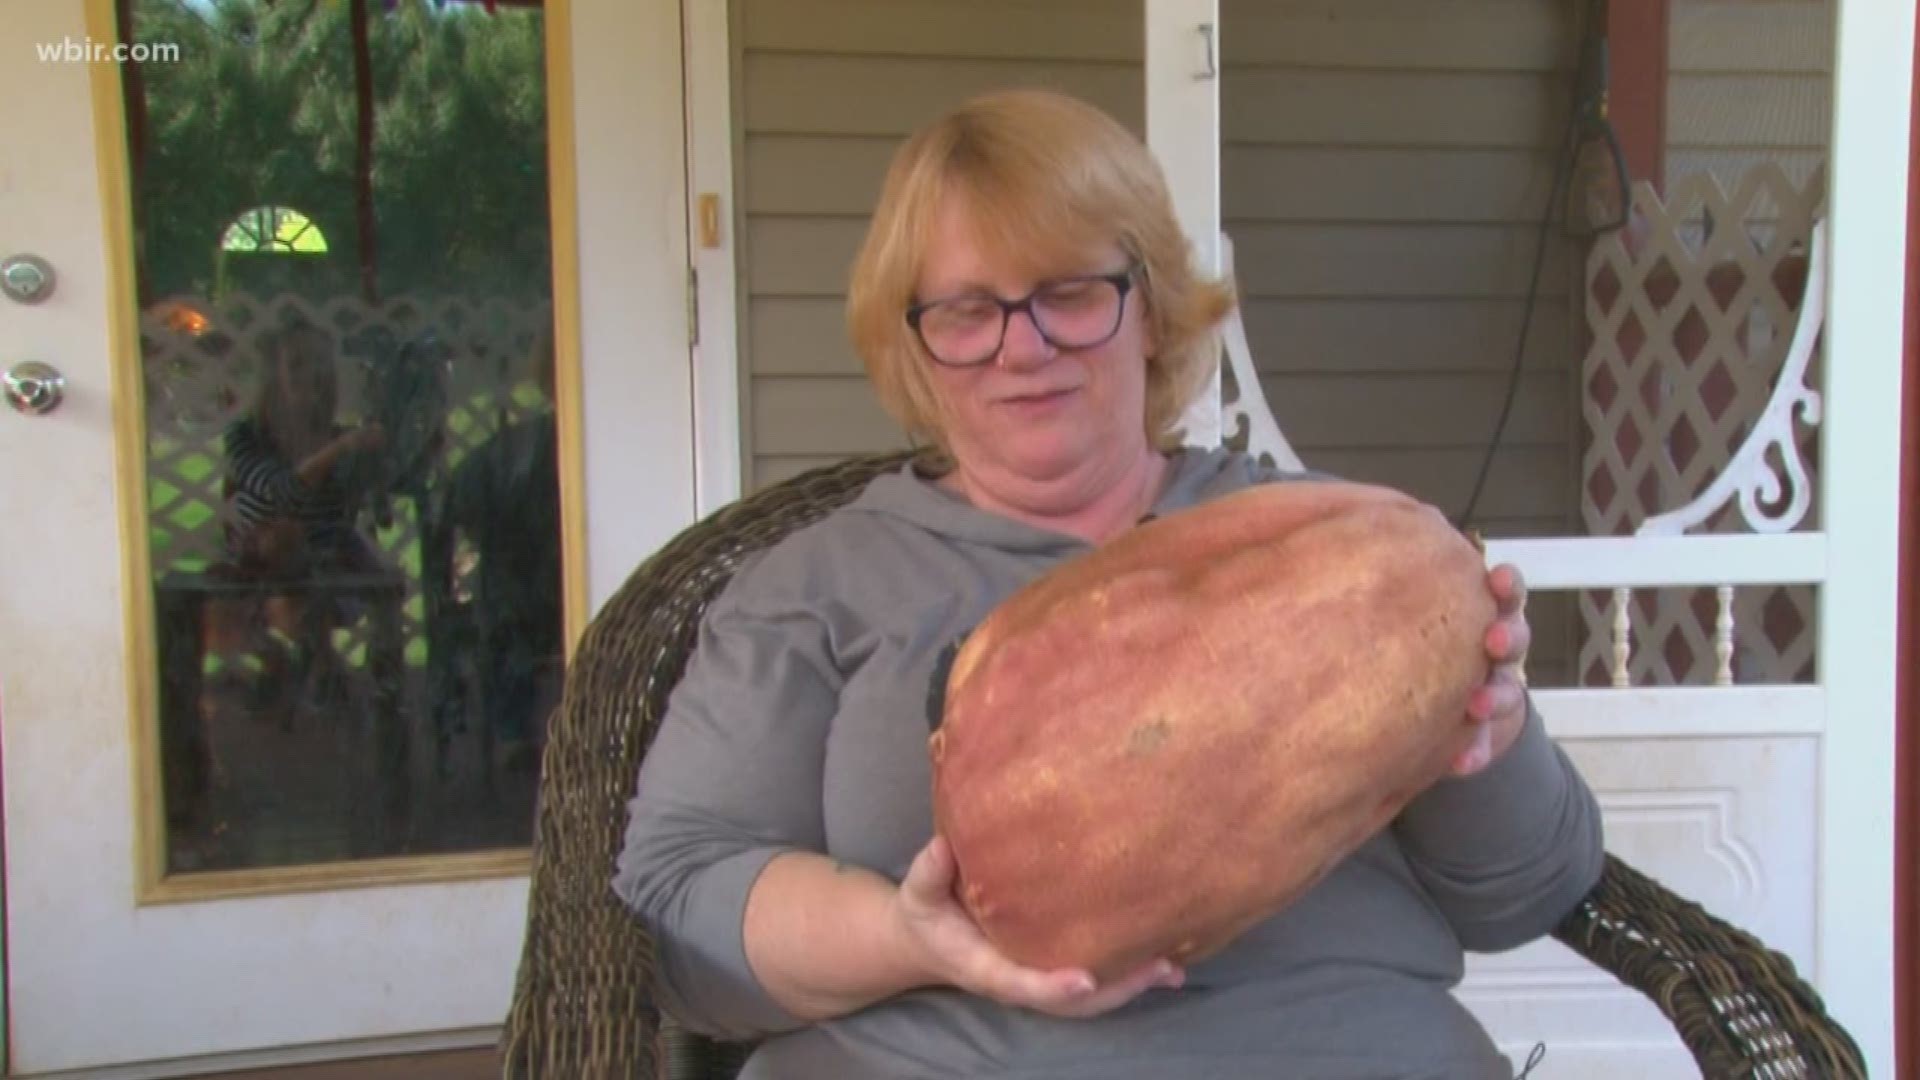 Two women in Blount County accidentally grew what ended up being a state record-breaking sweet potato.